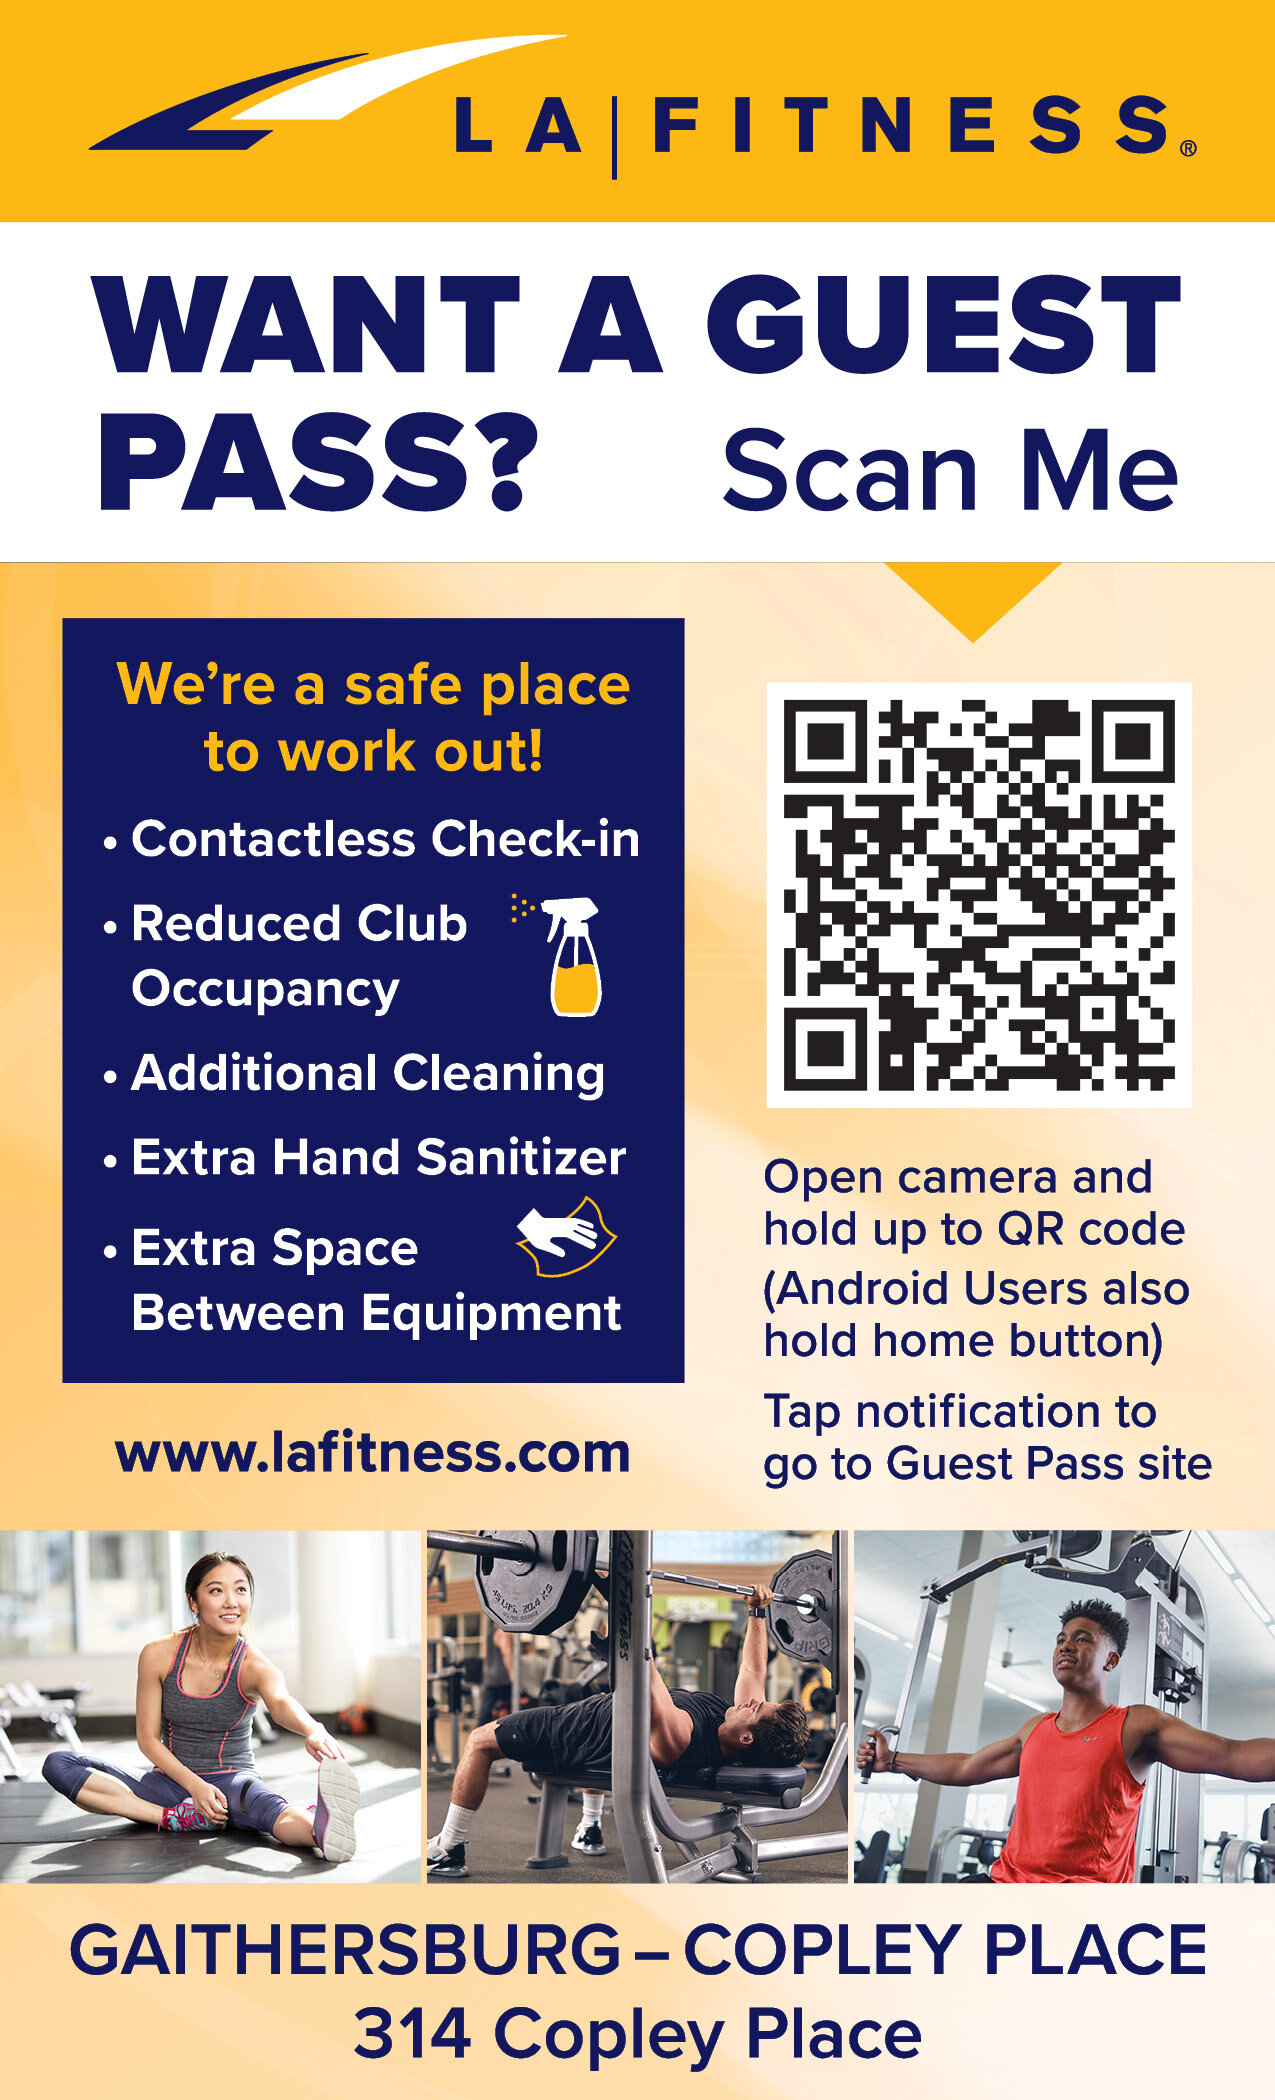 La Fitness With A Guest Pass